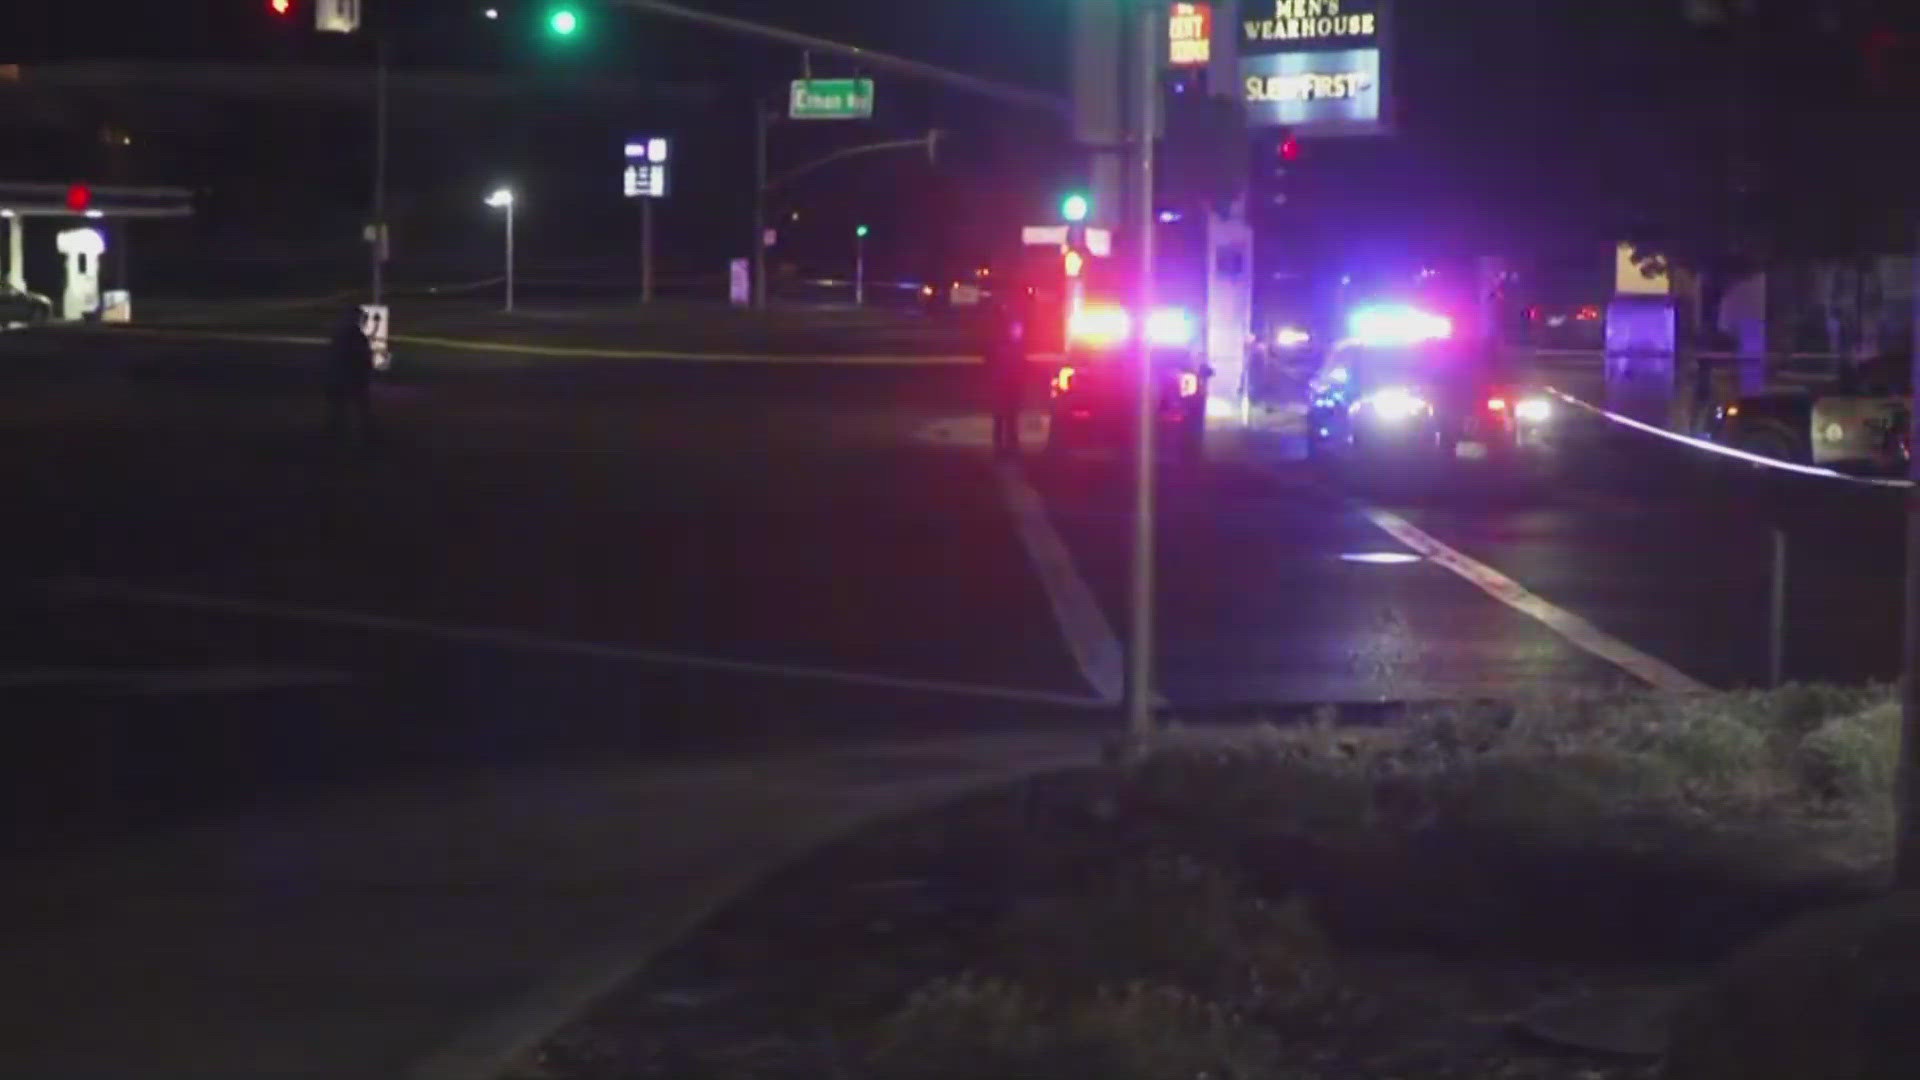 The Sacramento County Sheriff's Office says a man was shot near the Chick-fil-A on Alta Arden Expressway around 10 p.m.